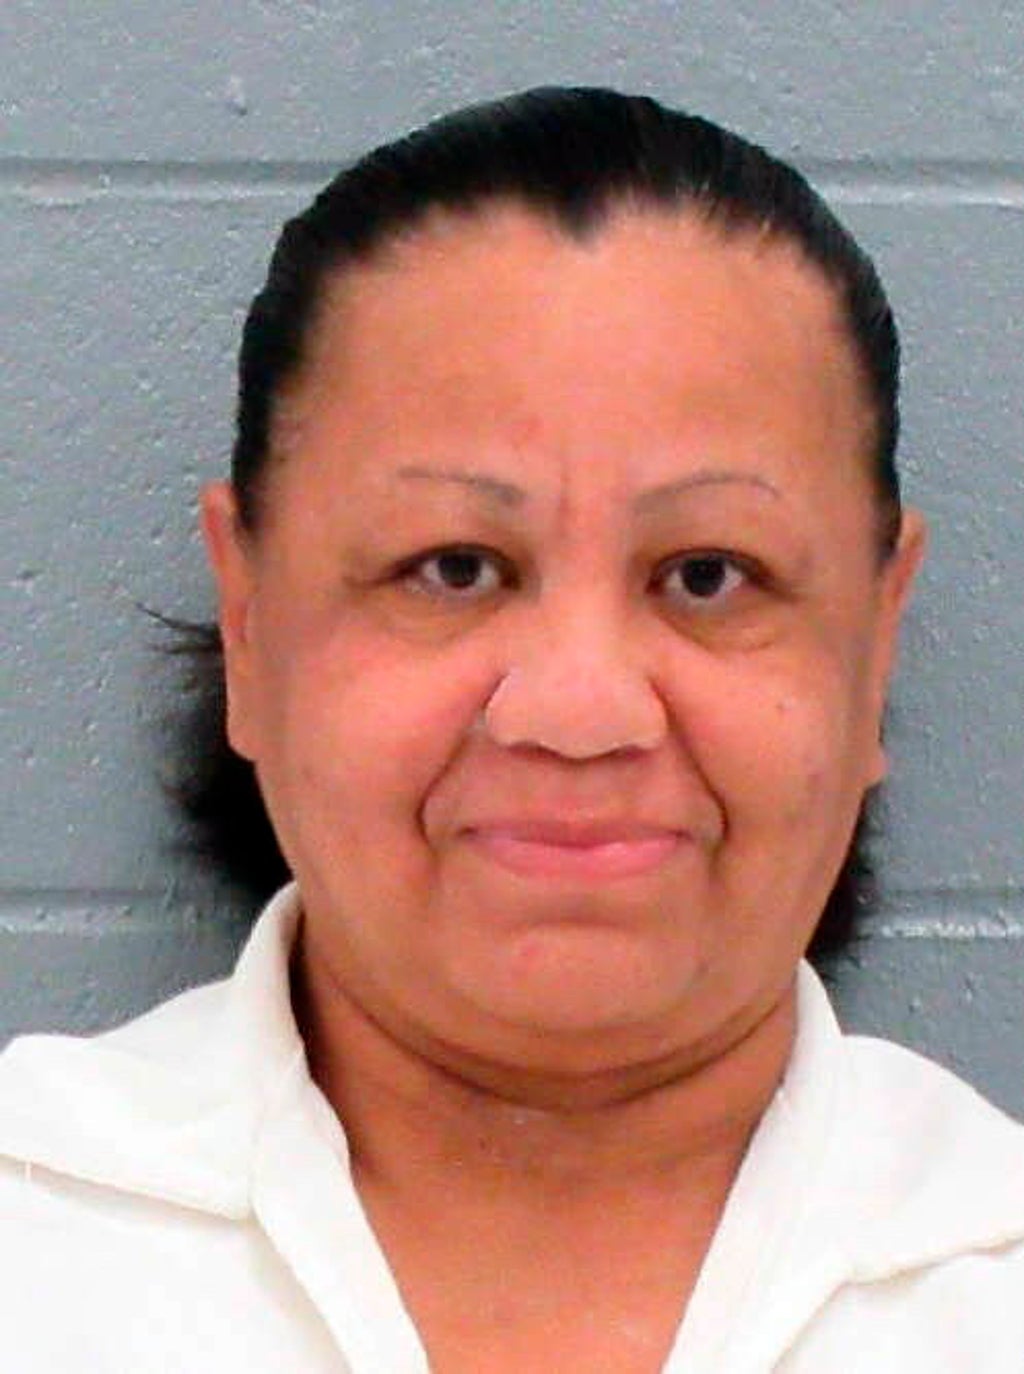 Texas lawmakers visit woman on death row with hugs, prayers